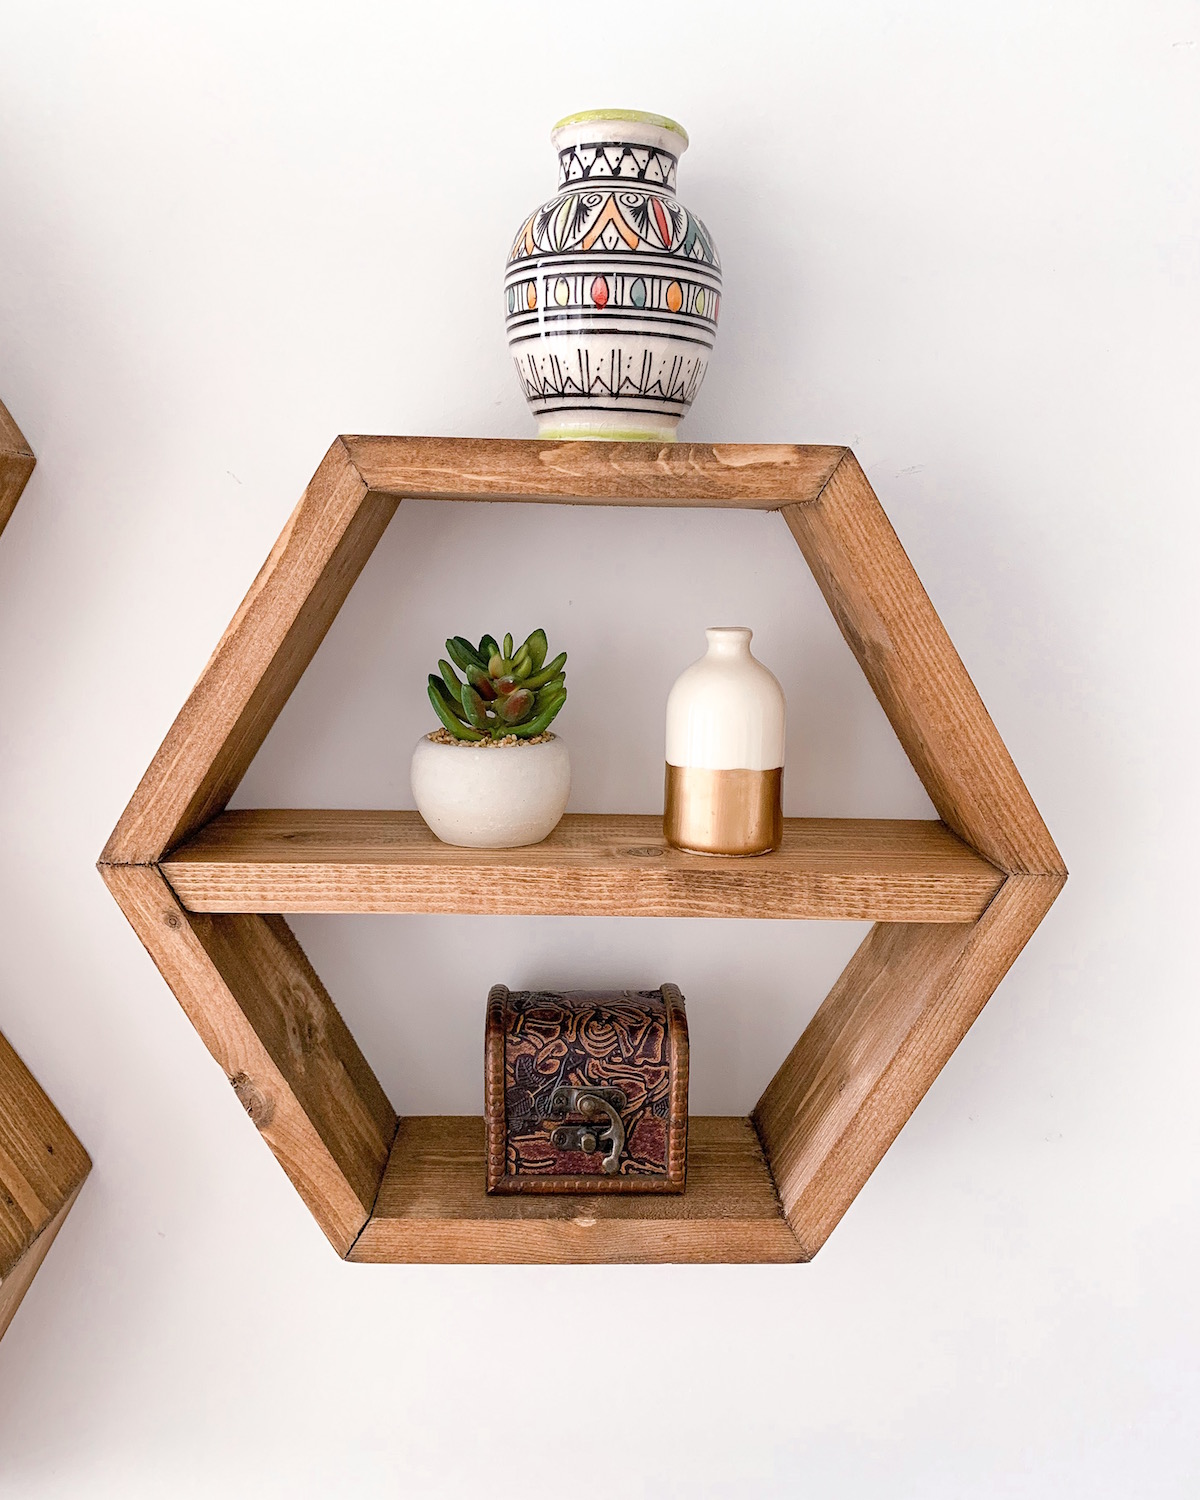 How To Decorate Honeycomb Shelves, How To Hang Honeycomb Shelves